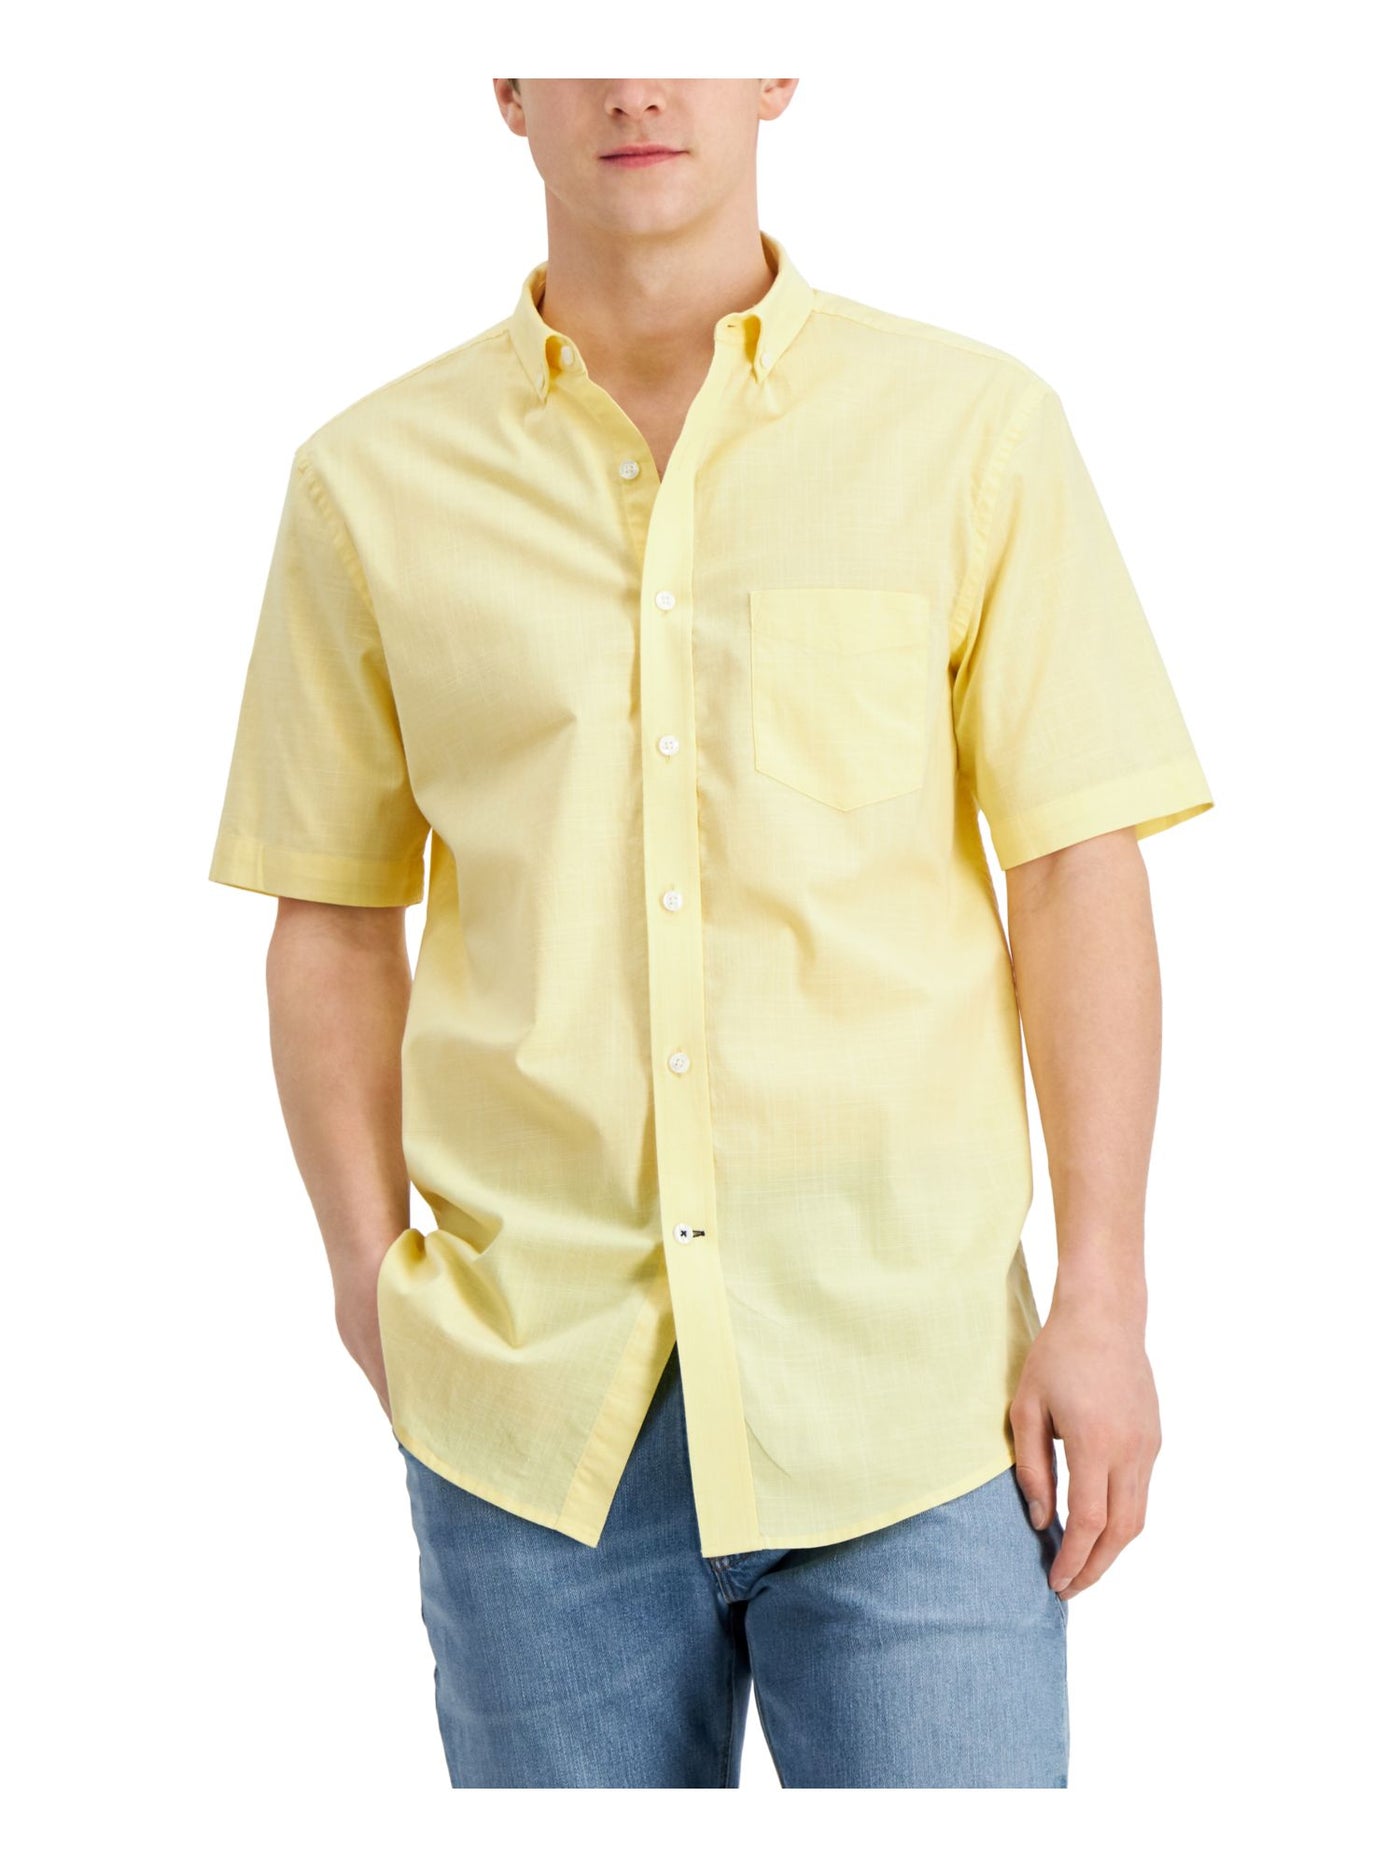 CLUBROOM Mens Yellow Classic Fit Button Down Stretch Casual Shirt S